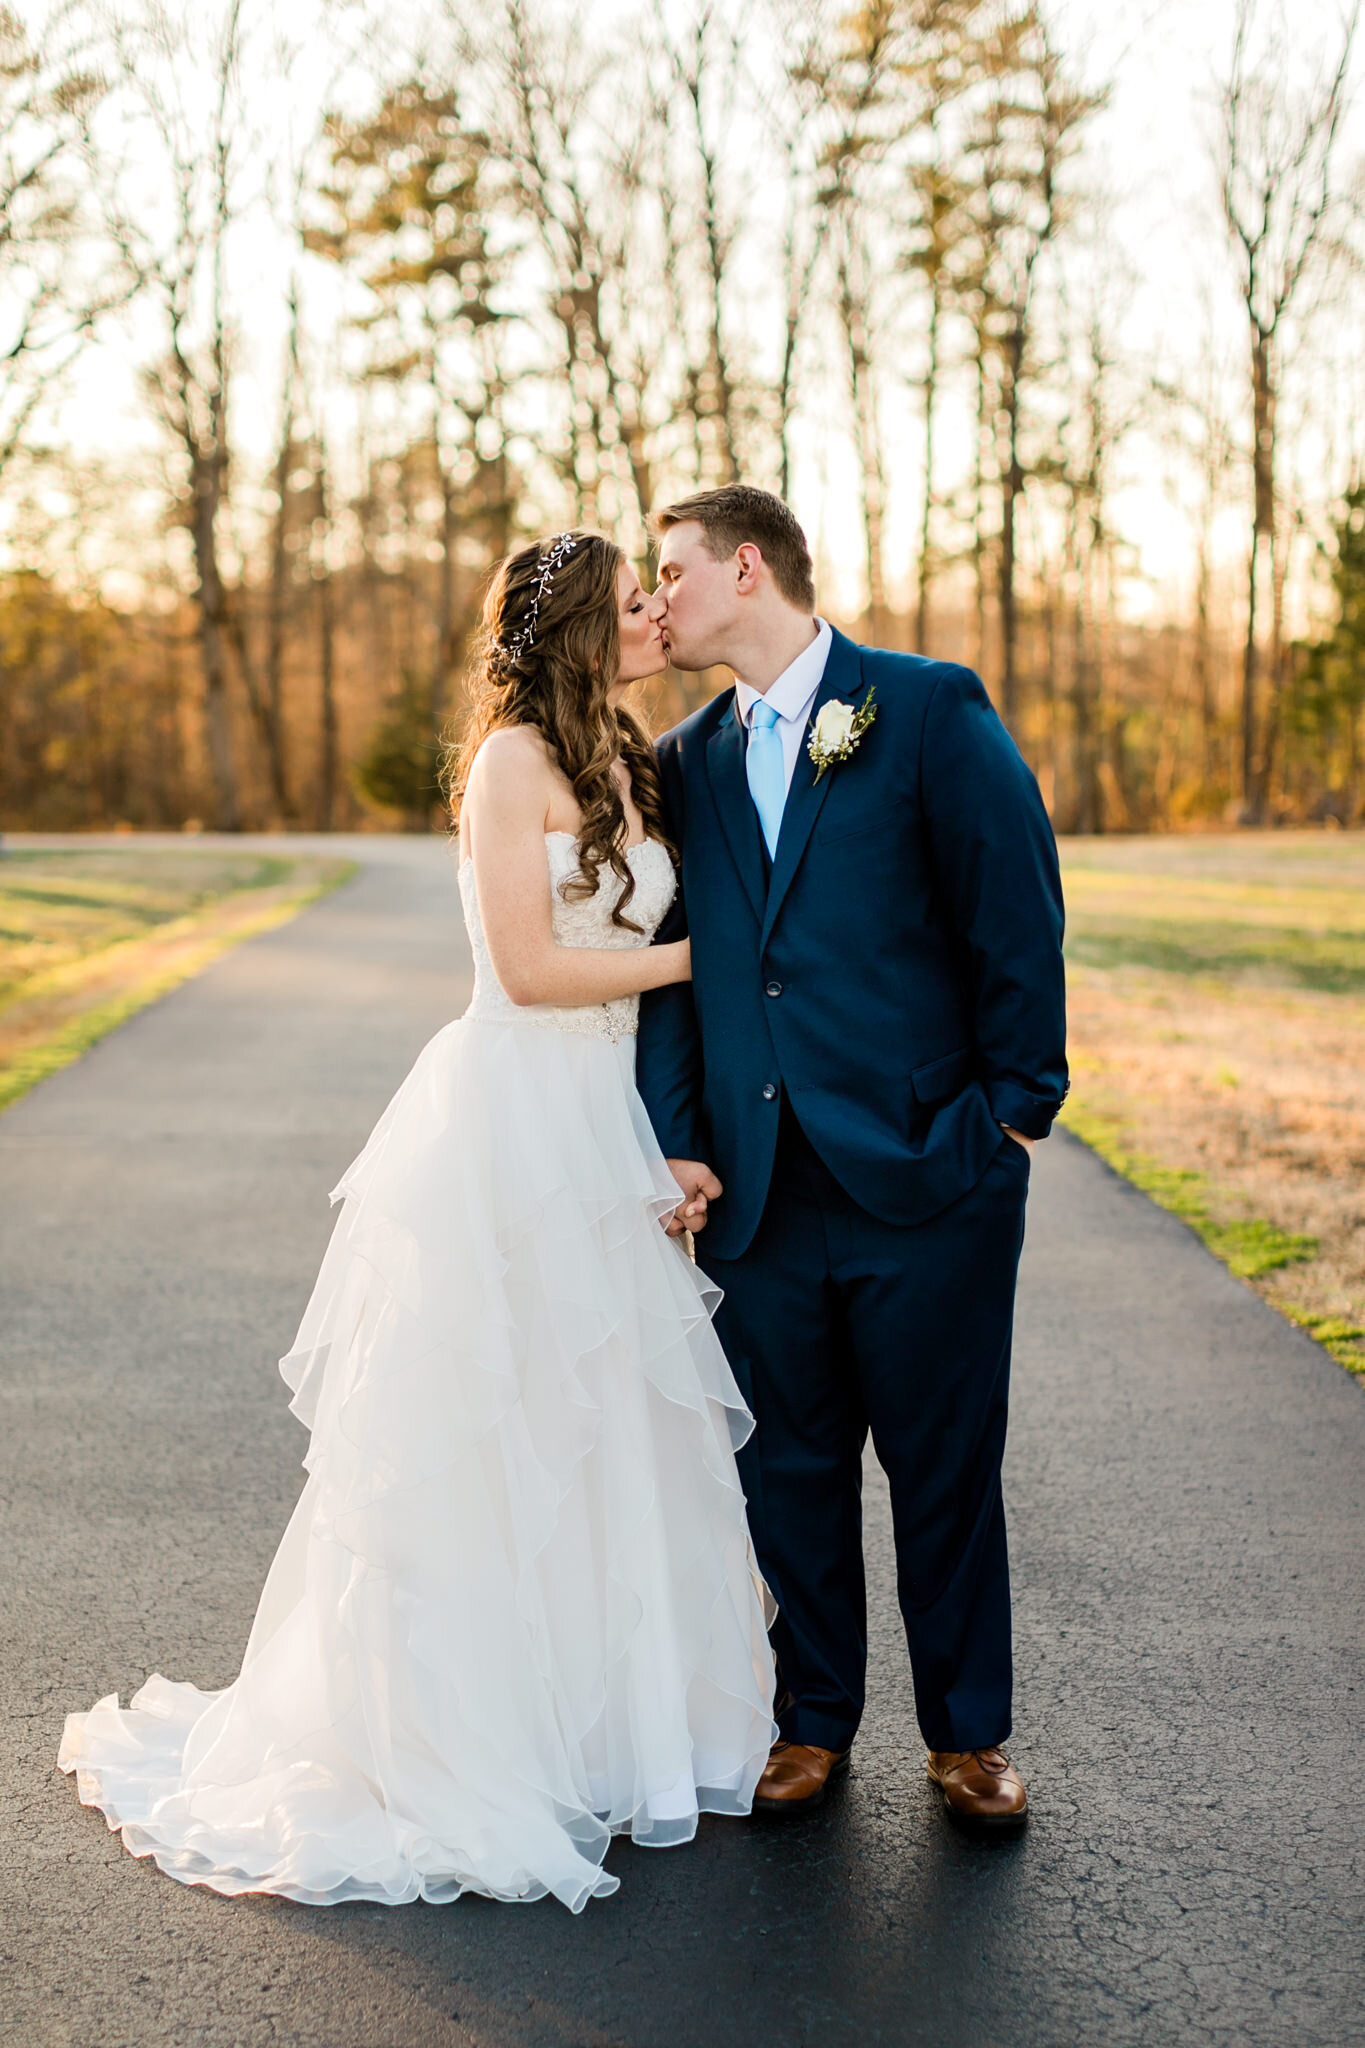 Durham Wedding Photographer | By G. Lin Photography | Bride and groom kissing outdoors during sunset